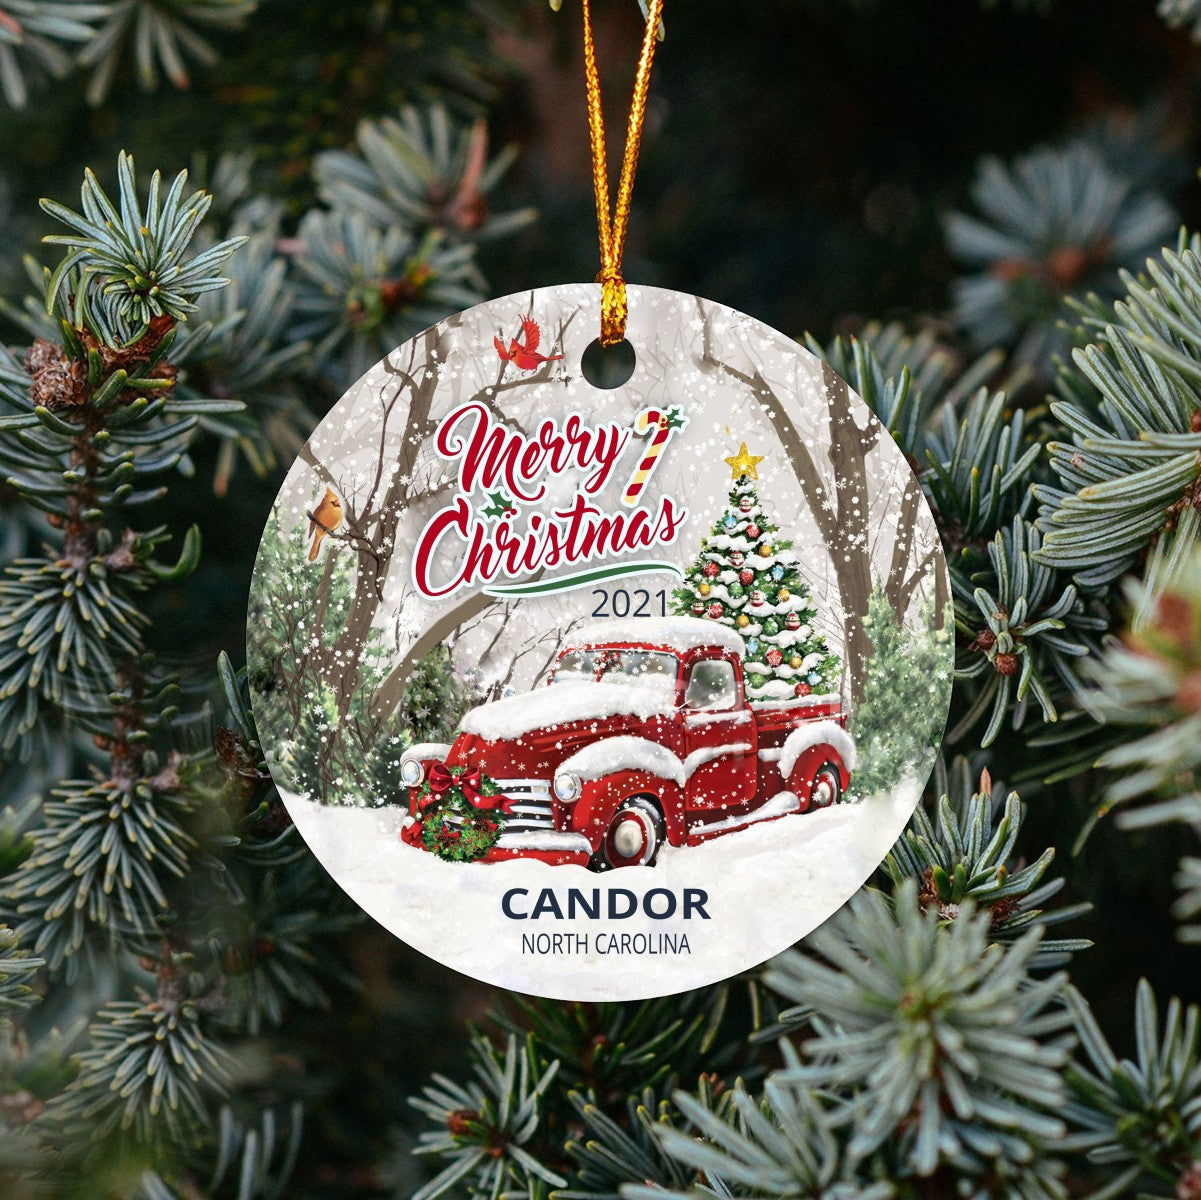 Christmas Tree Ornaments Candor - Ornament With Name City, State Candor North Carolina NC Ornament - Red Truck Xmas Ornaments 3'' Plastic Gift For Family, Friend And Housewarming